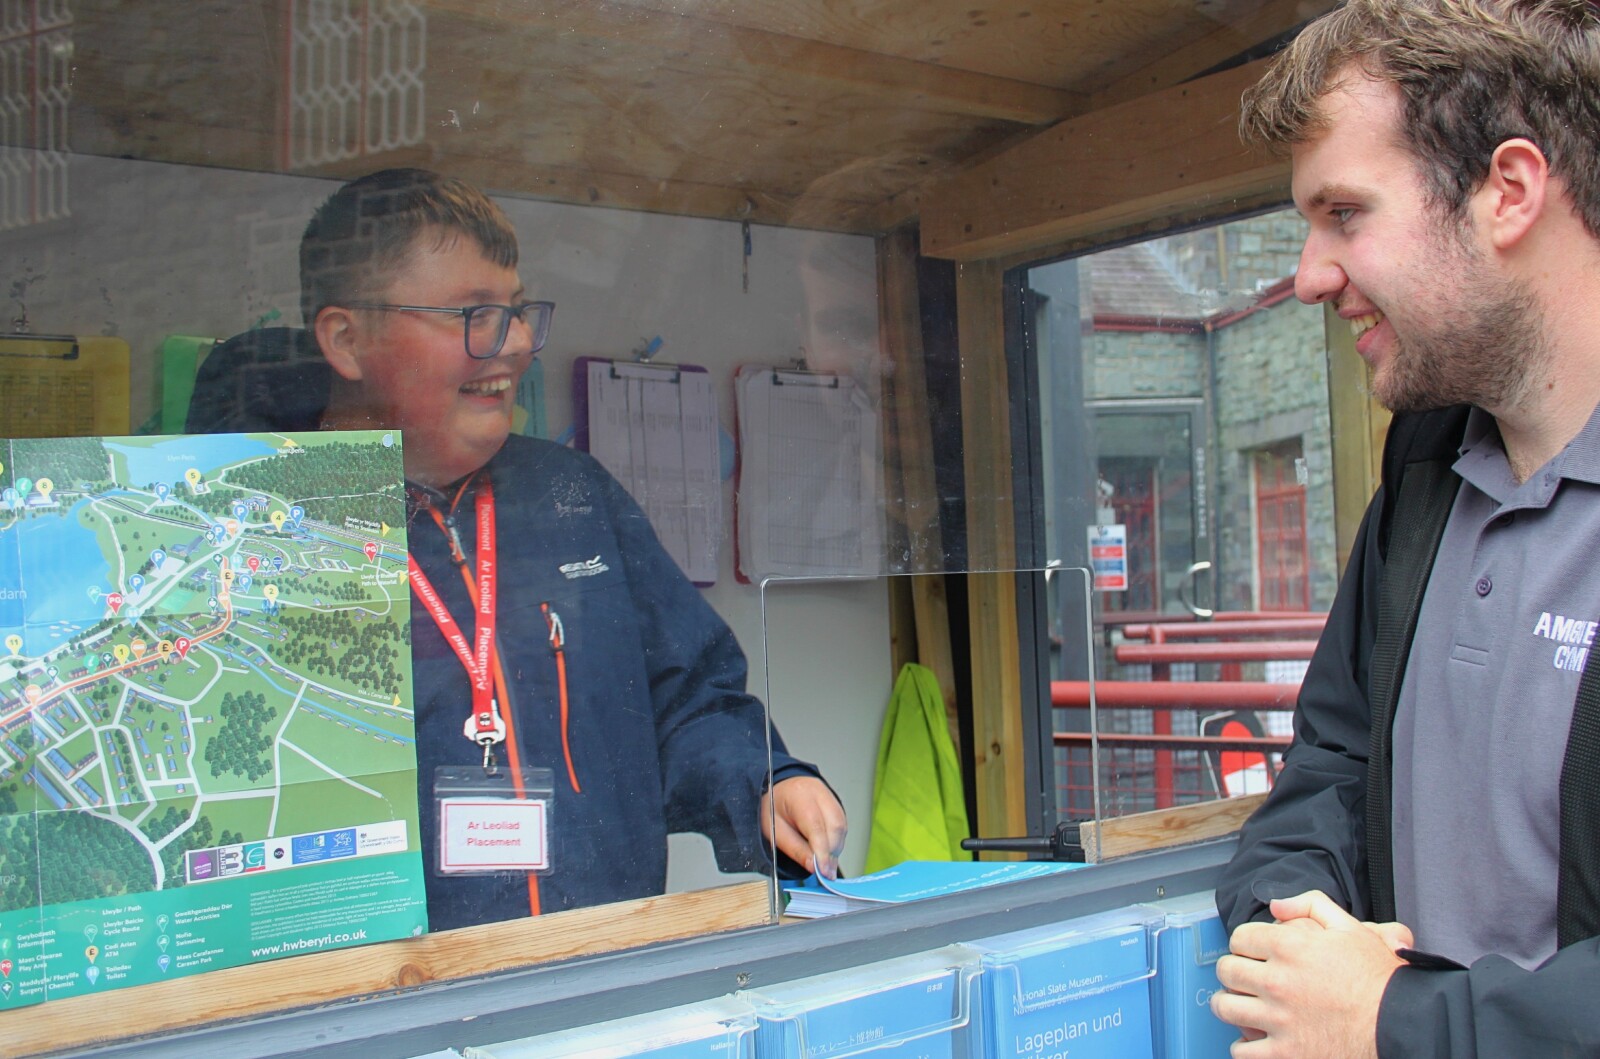 An individual stood inside the welcome hut at the National Slate Museum, smiling while talking to a member of staff.